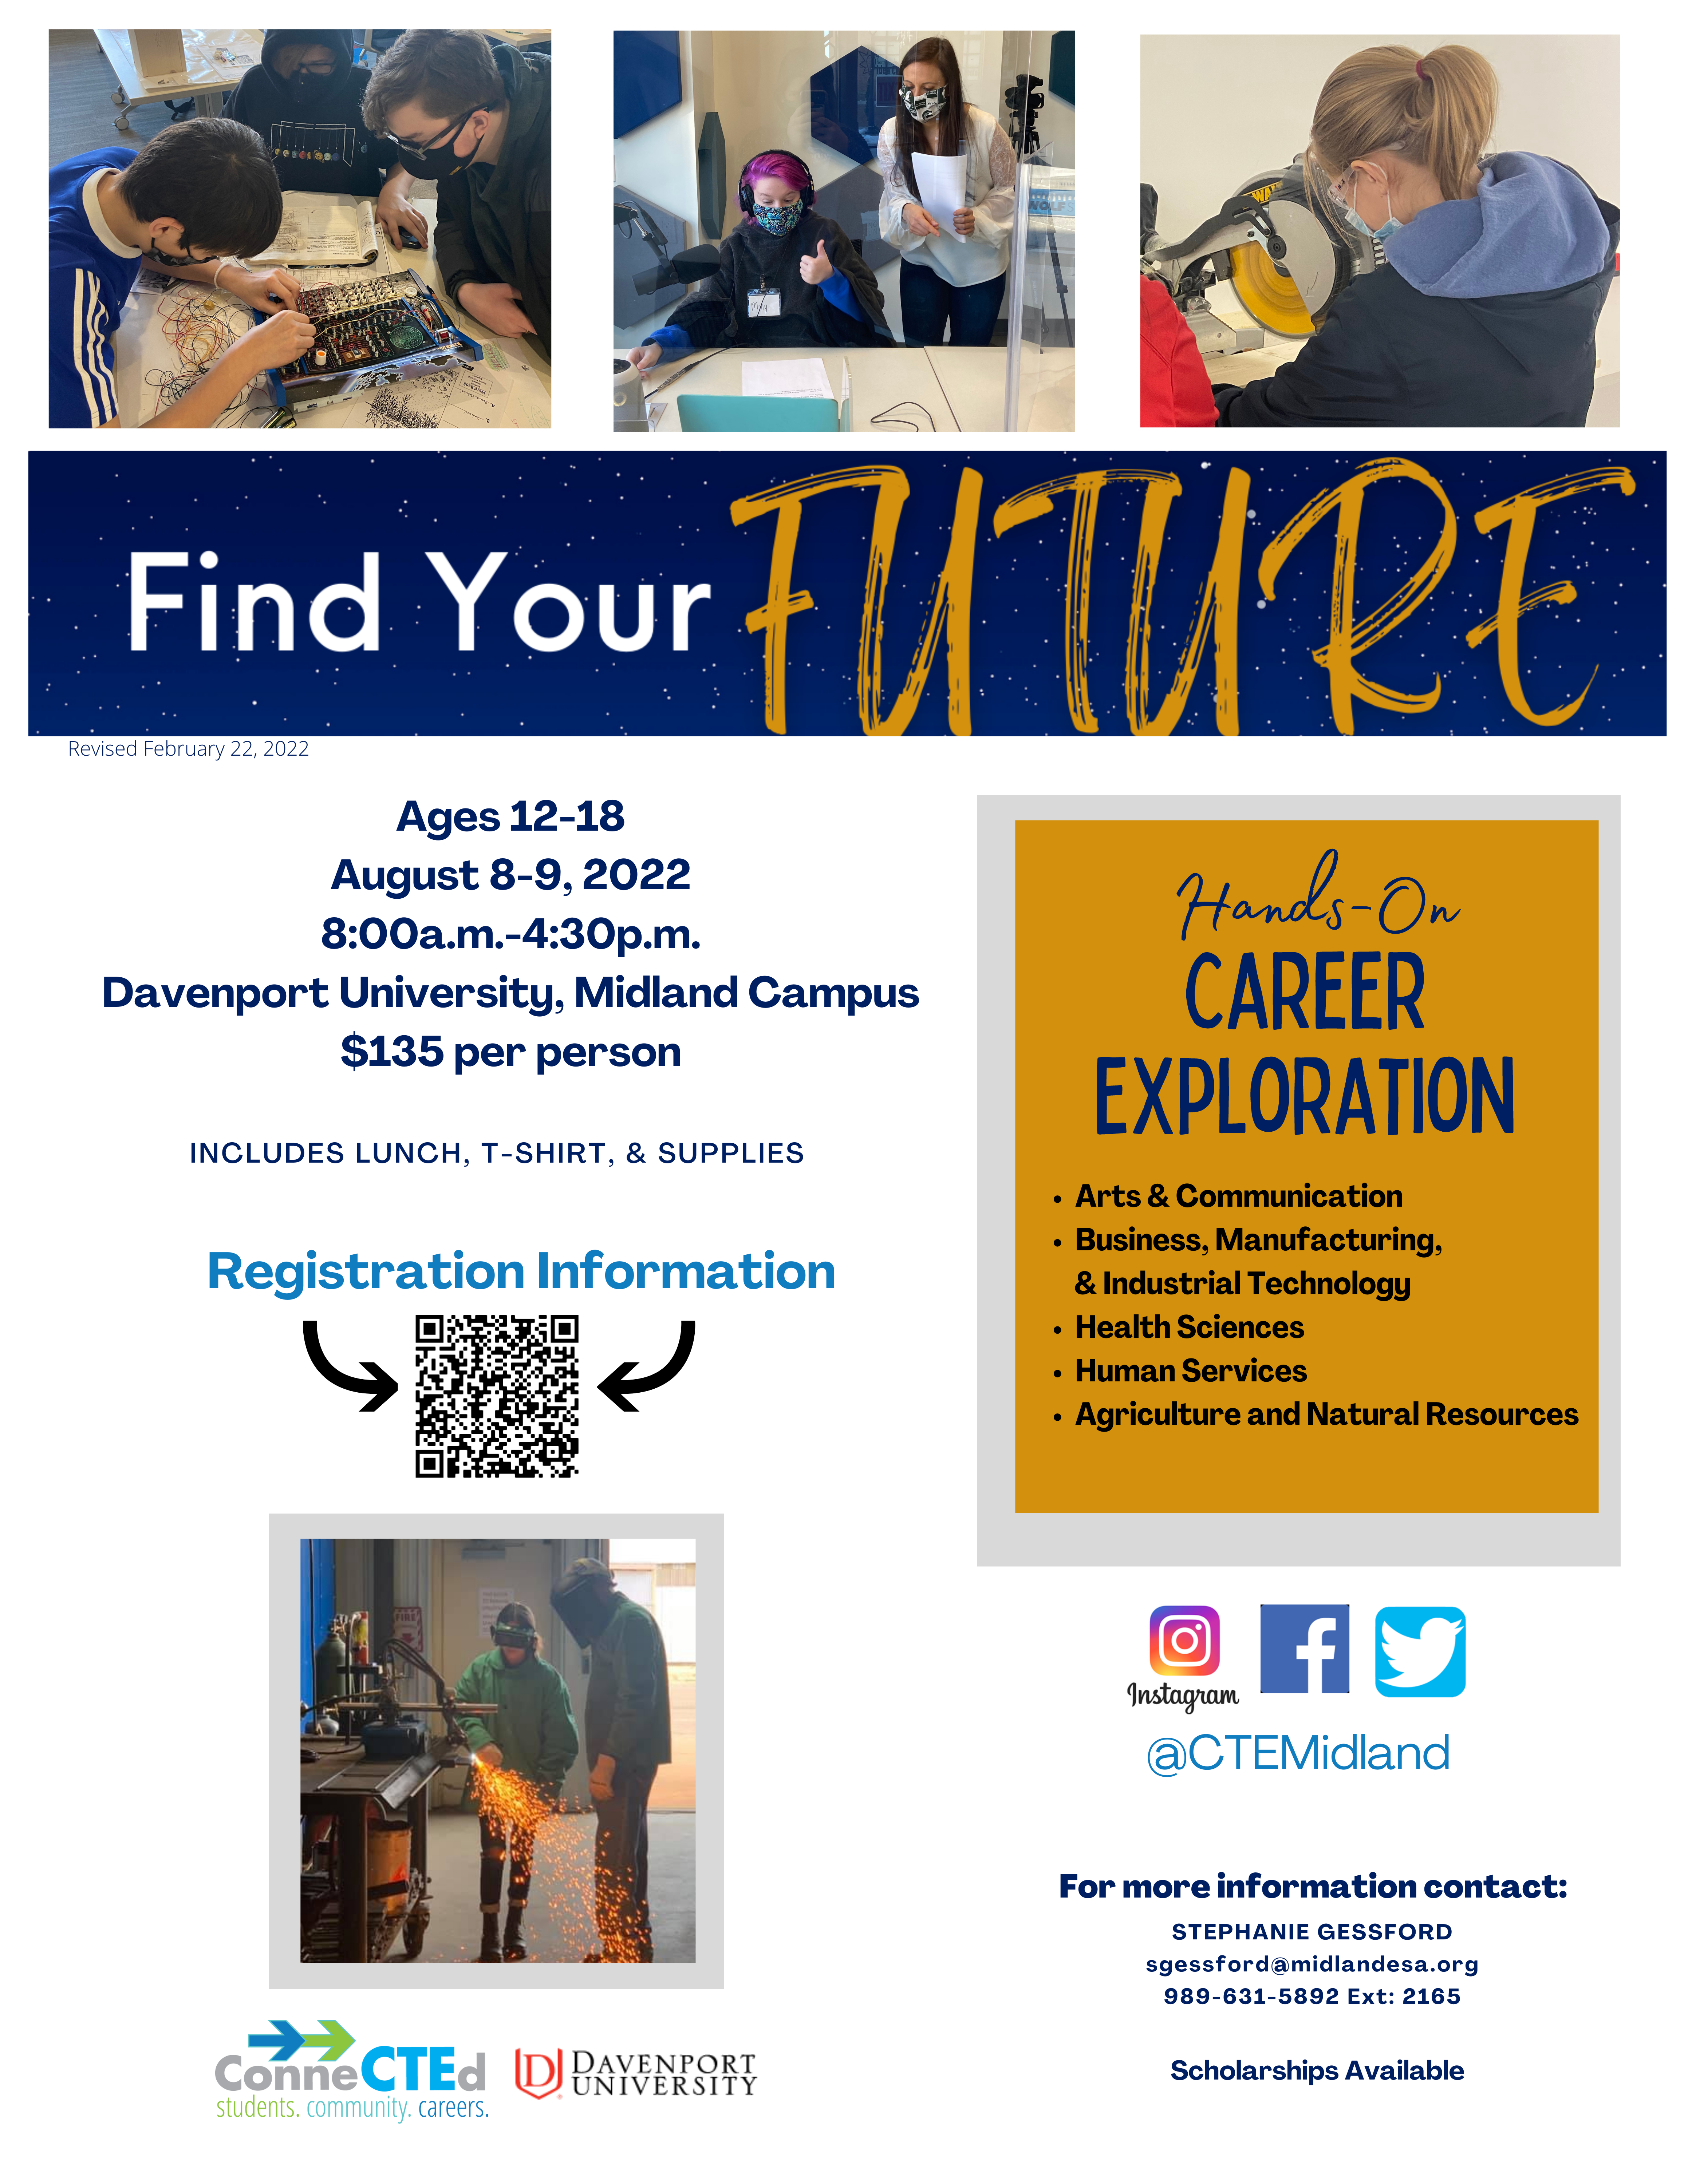 Find Your Future Camp